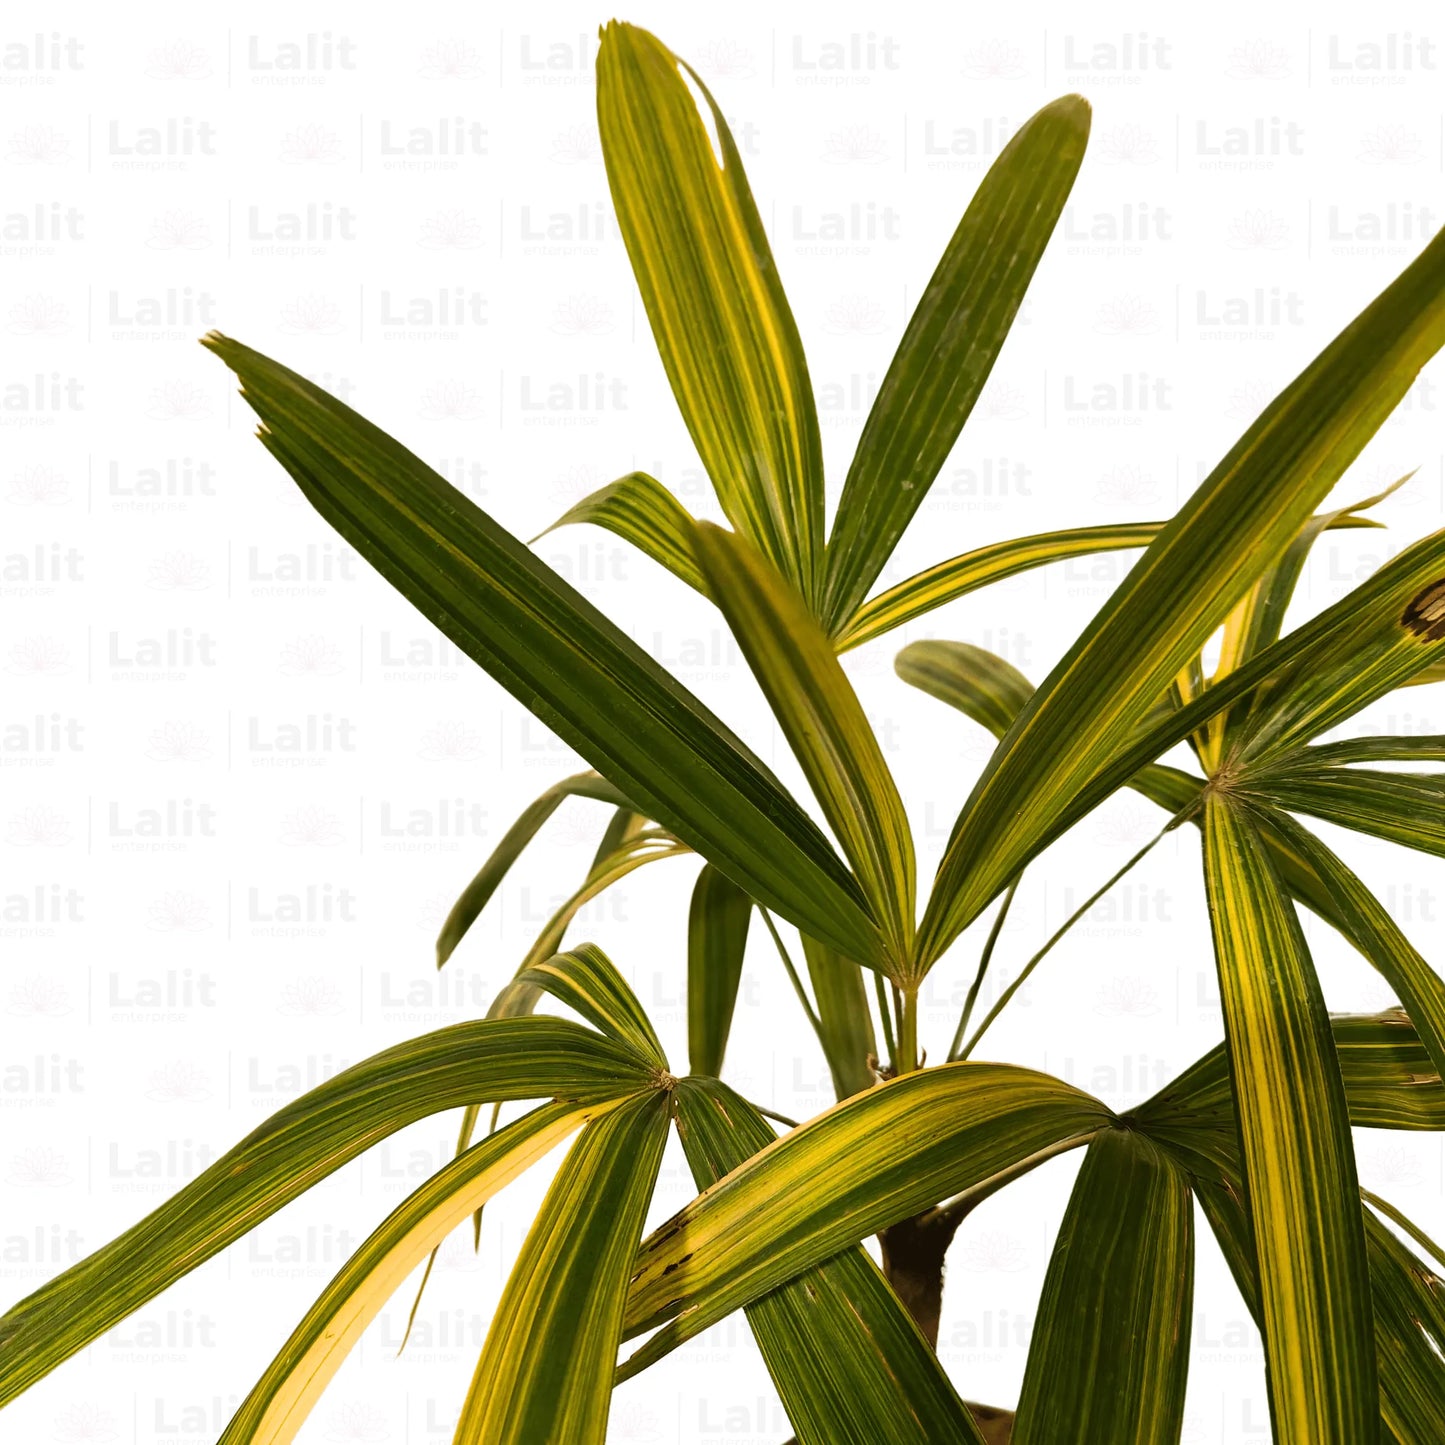 Buy Lady palm or Bamboo palm Online at Lalitenterprise